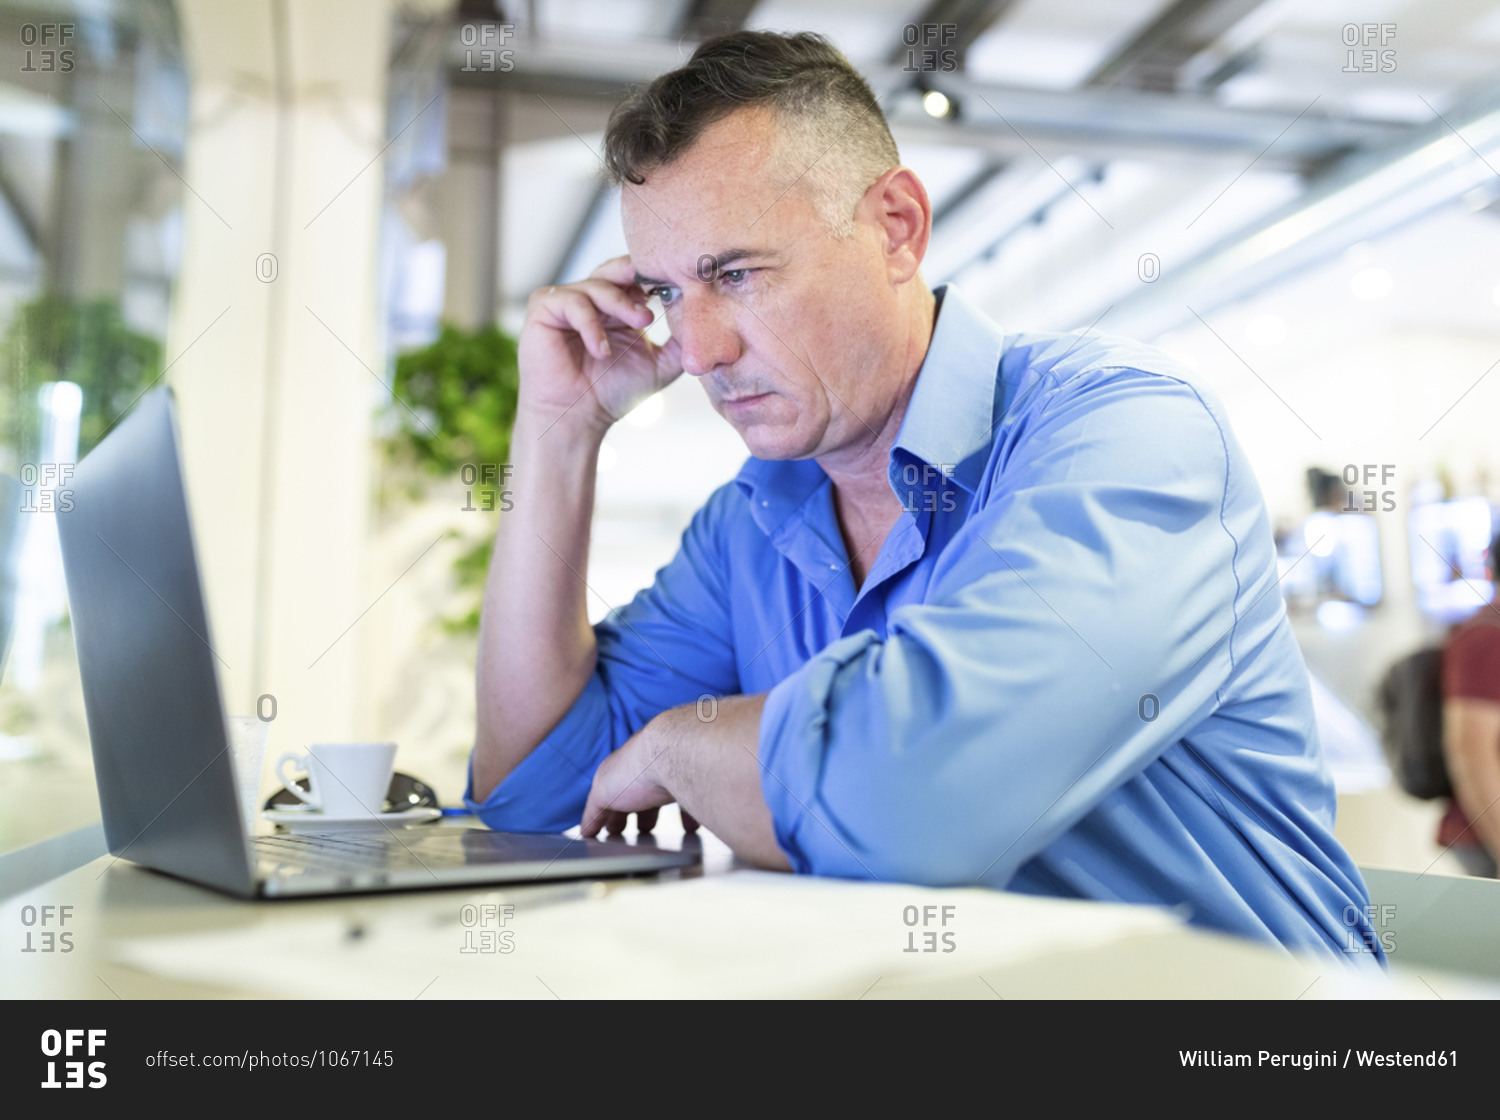 Distressed male professional staring at laptop while sitting in coffee shop